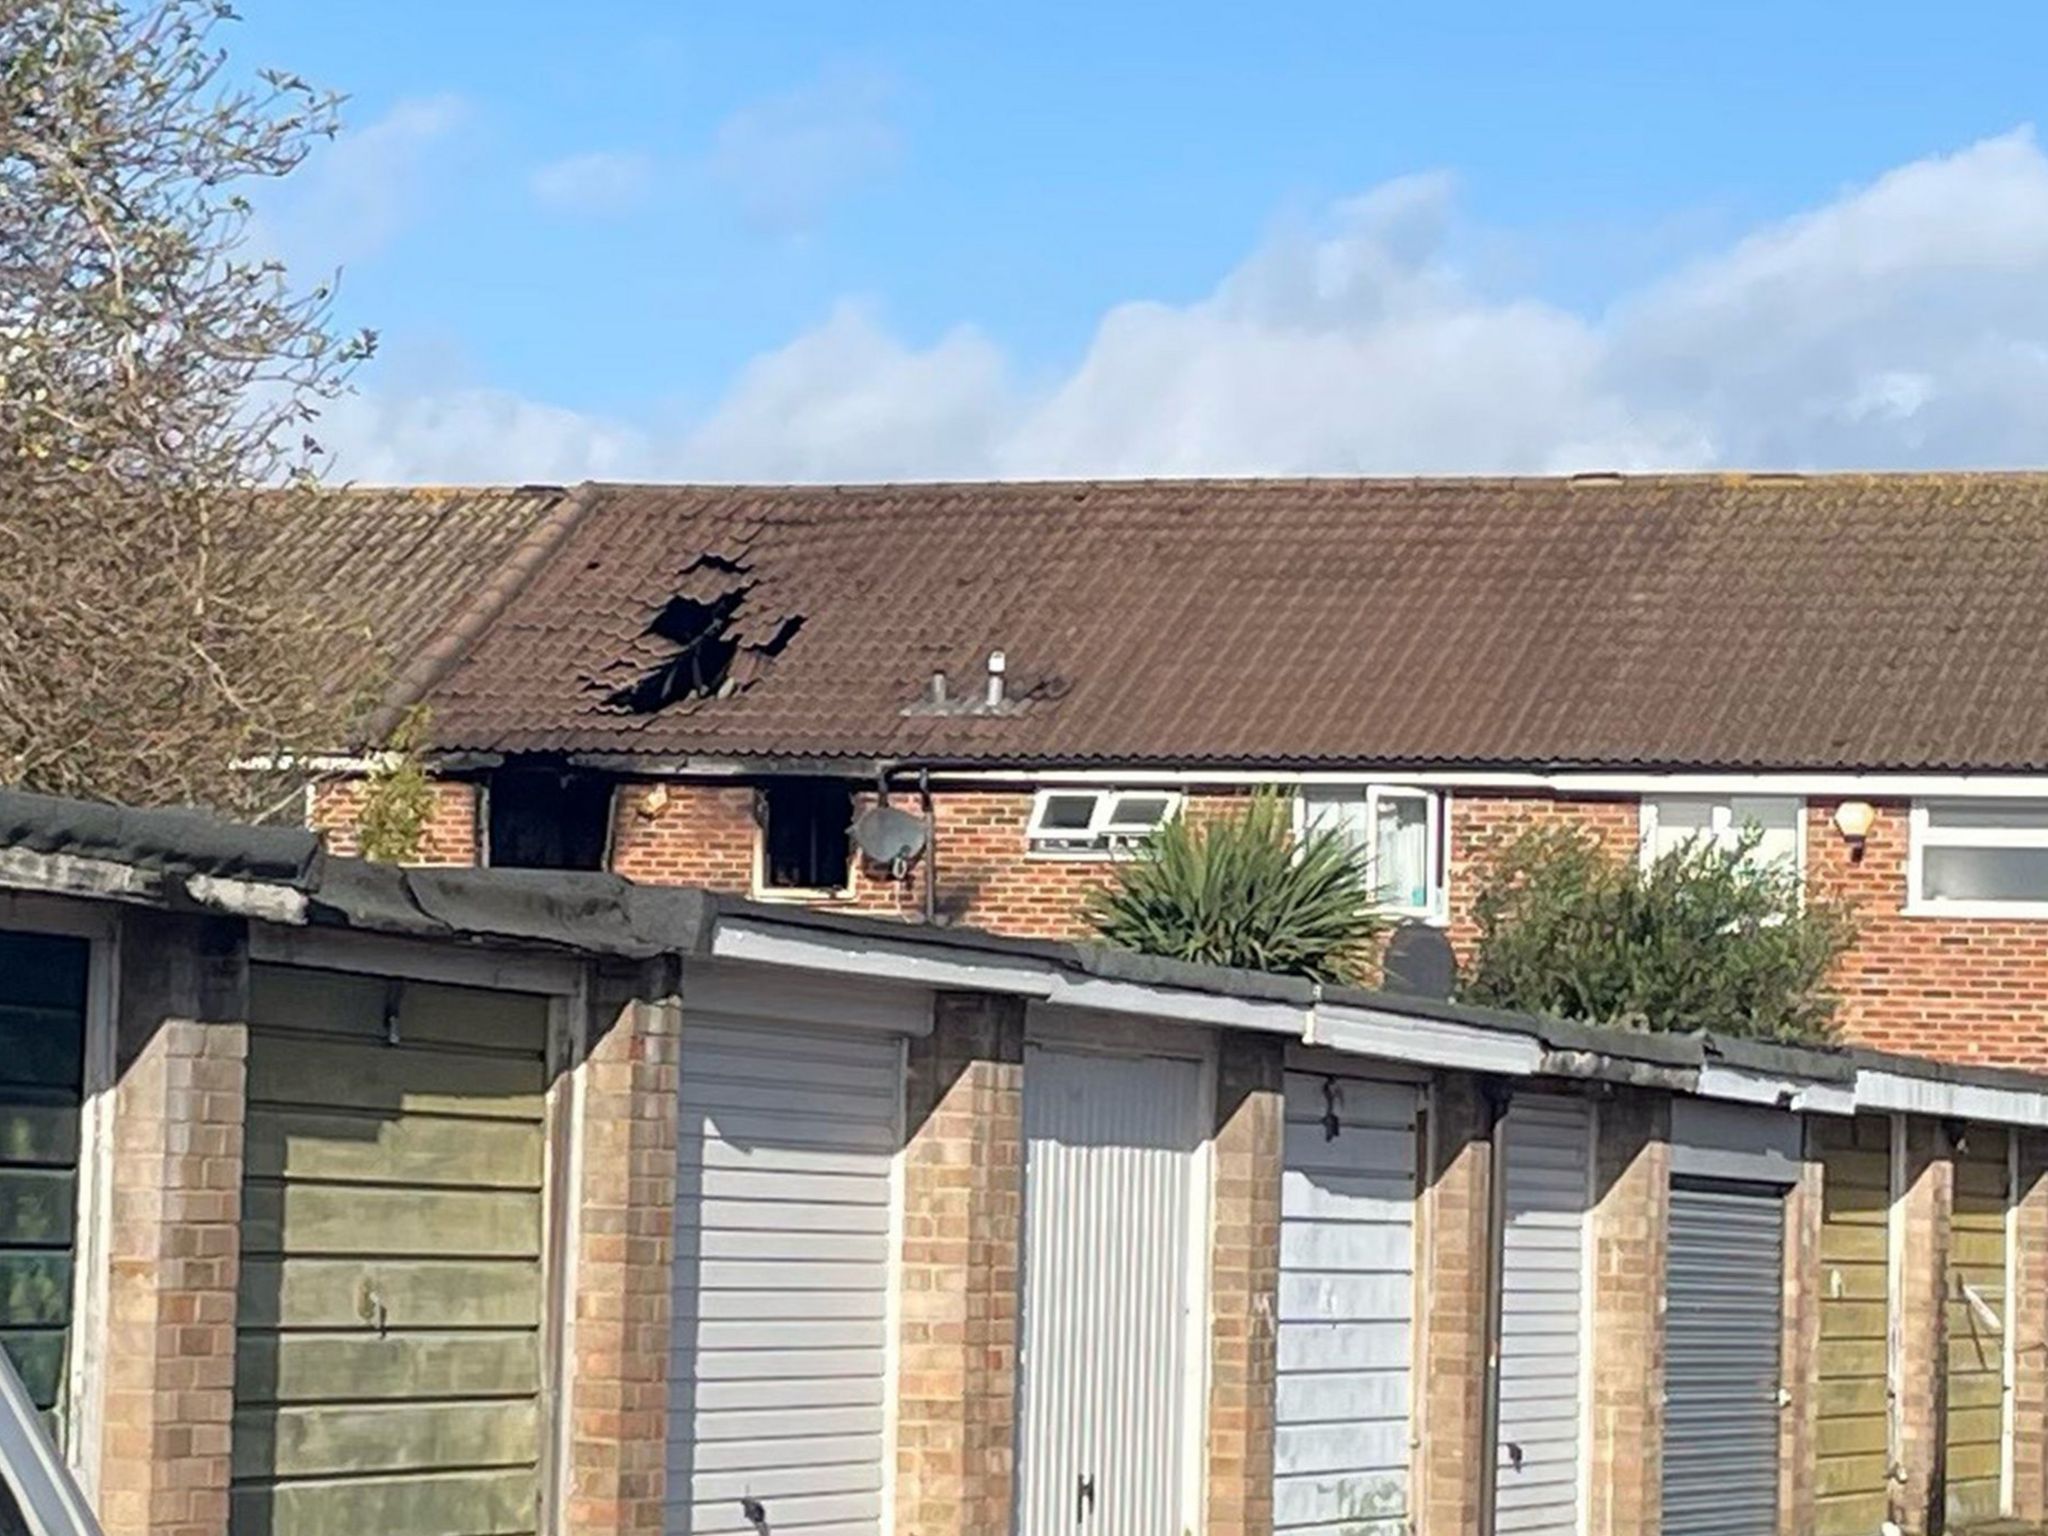 Image showing broken and burnt windows and collapsed, charred roof tiles.